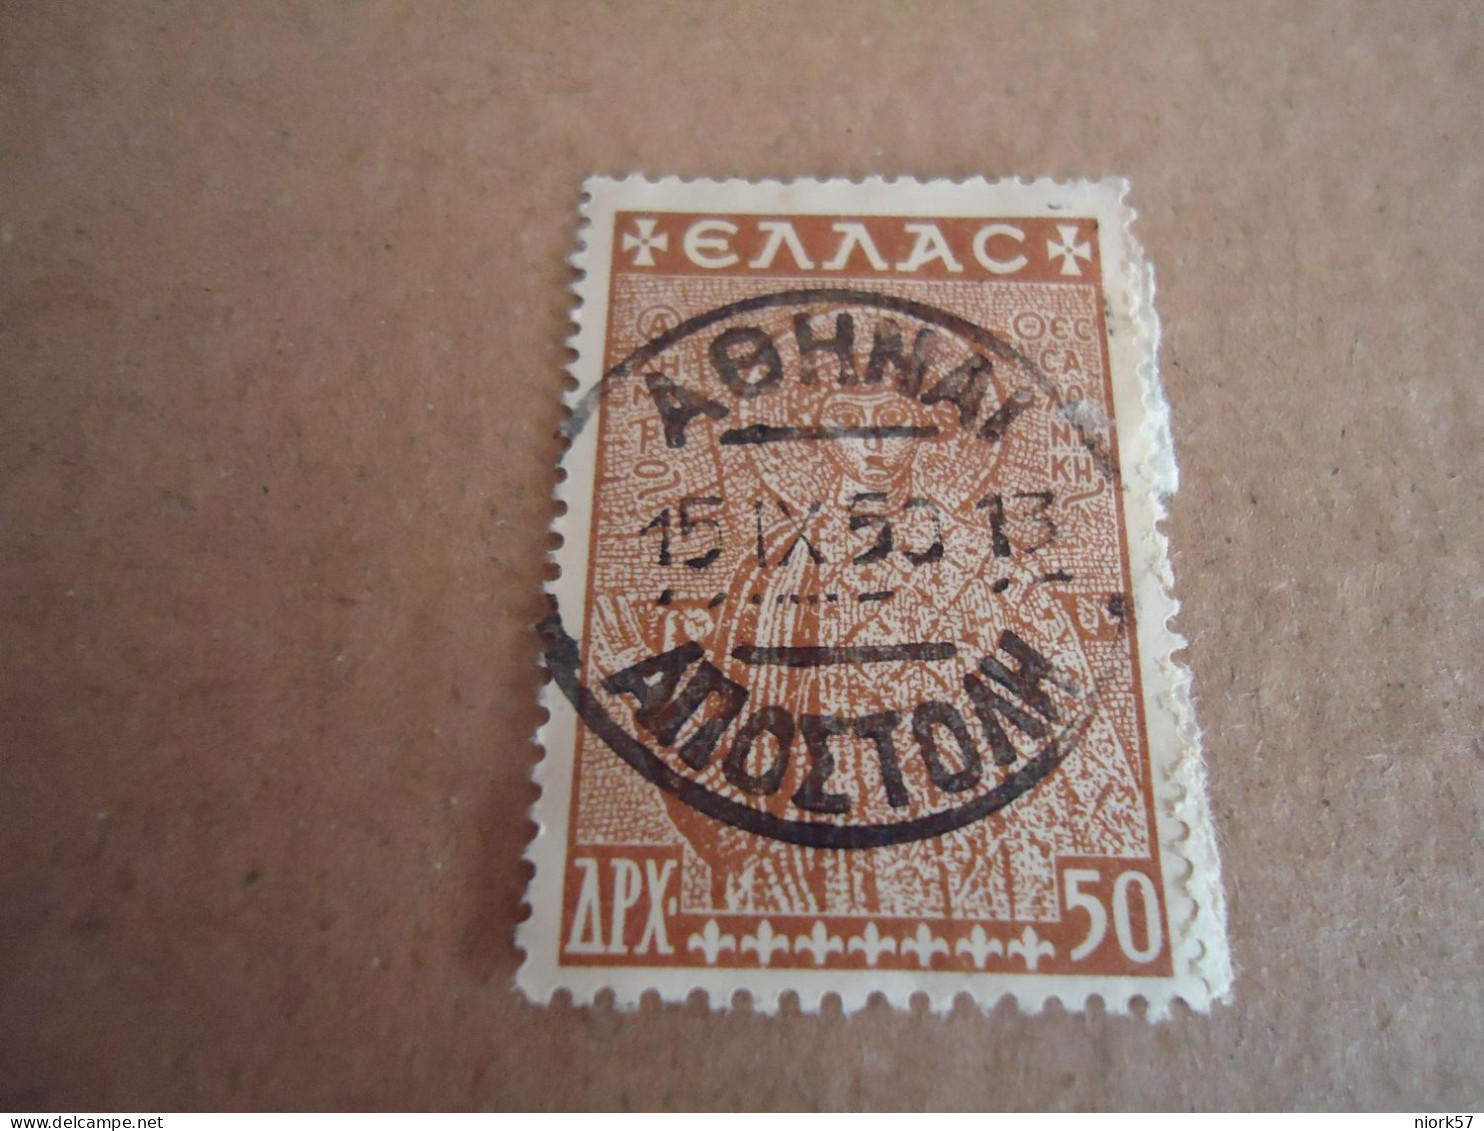 GREECE   POSTMARK ON STAMPS   ΑΘΗΝΑΙ ΑΠΟΣΤΟΛΗ 1953/13 - Marcofilie - EMA (Printer)